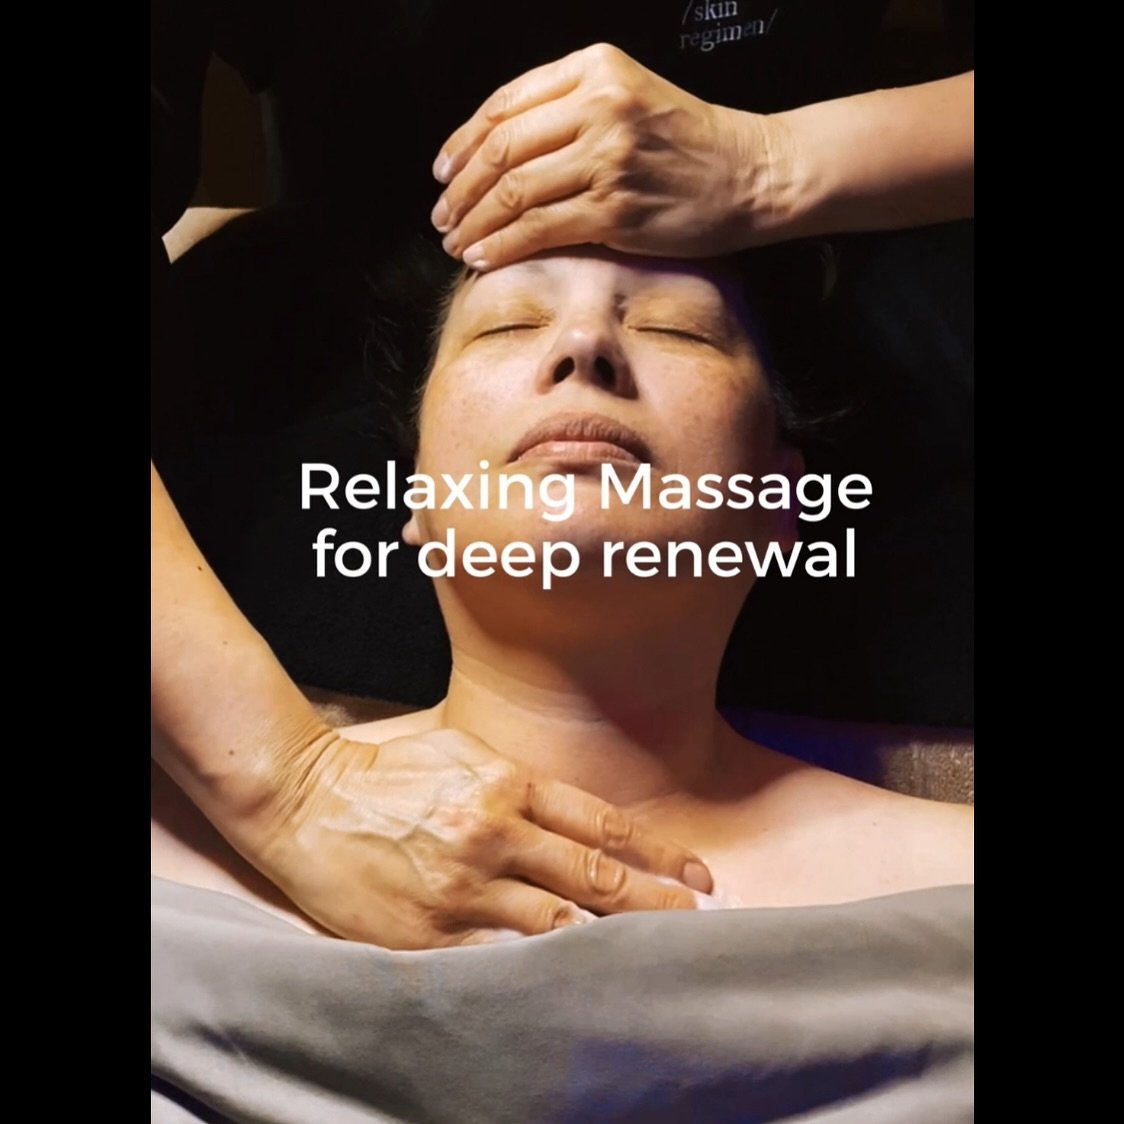 Celeste&rsquo;s facials are a soul-full body experience that enhances a state of deep relaxation. 

Good skin starts within. 

Take advantage of our gift certificate promo for a little Self-care or 
Mama-care. 💖

#rewildngather #facials #goodskin #o